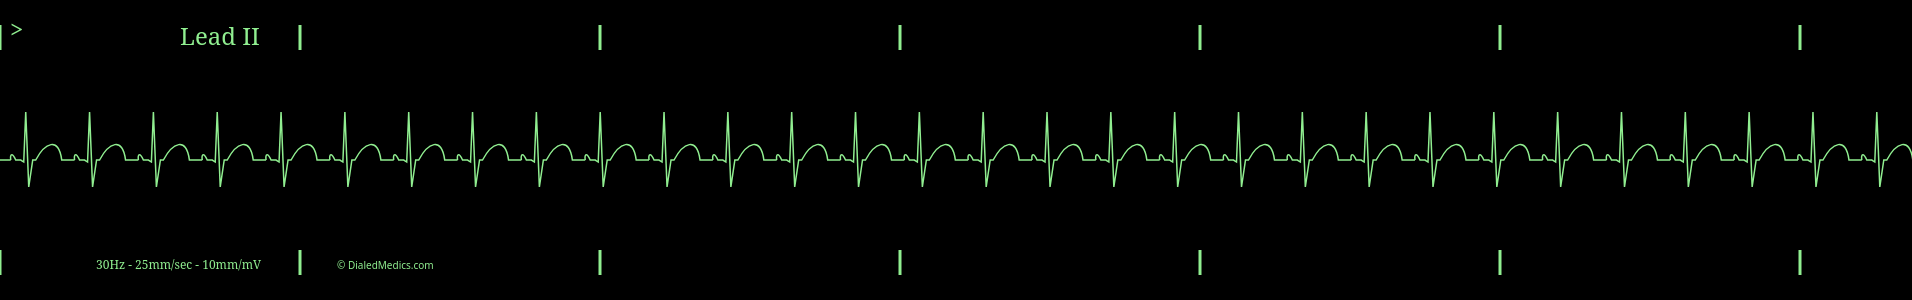 Software generated Normal Sinus Rhythm EKG monitor capture with HR of 94.